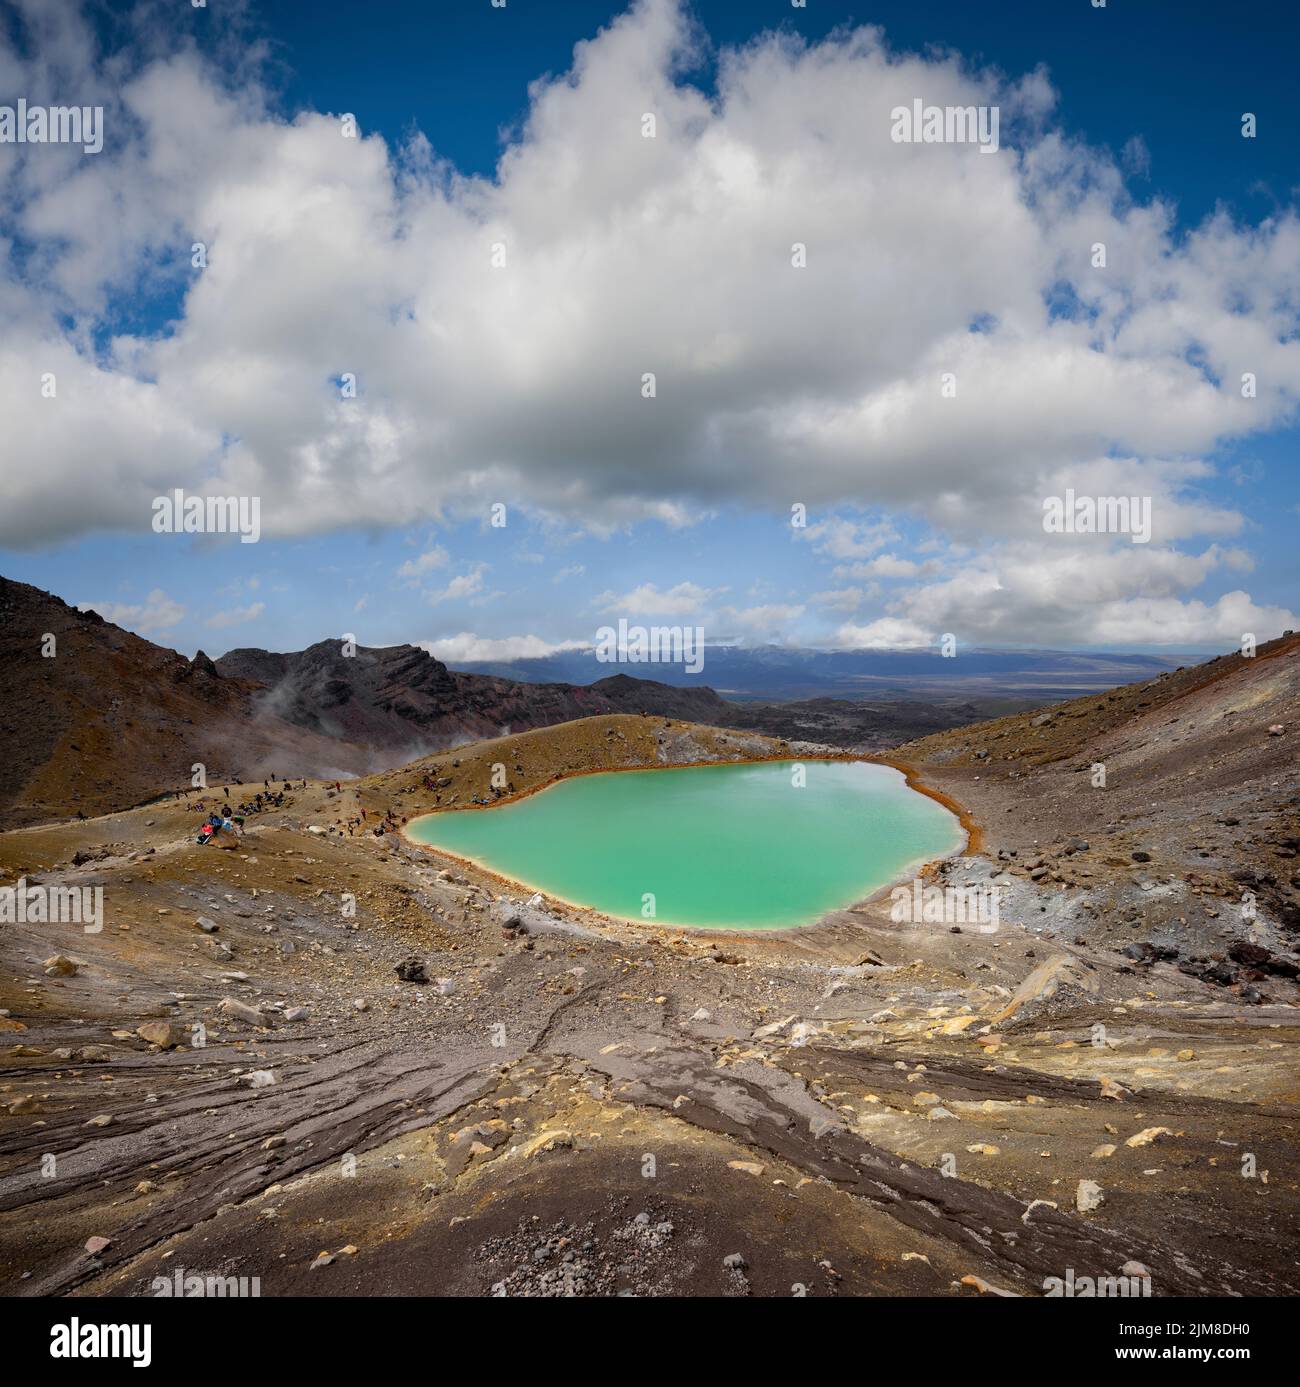 Emerald pool in the landscape of the Tongariro walking route, New Zealand. Stock Photo